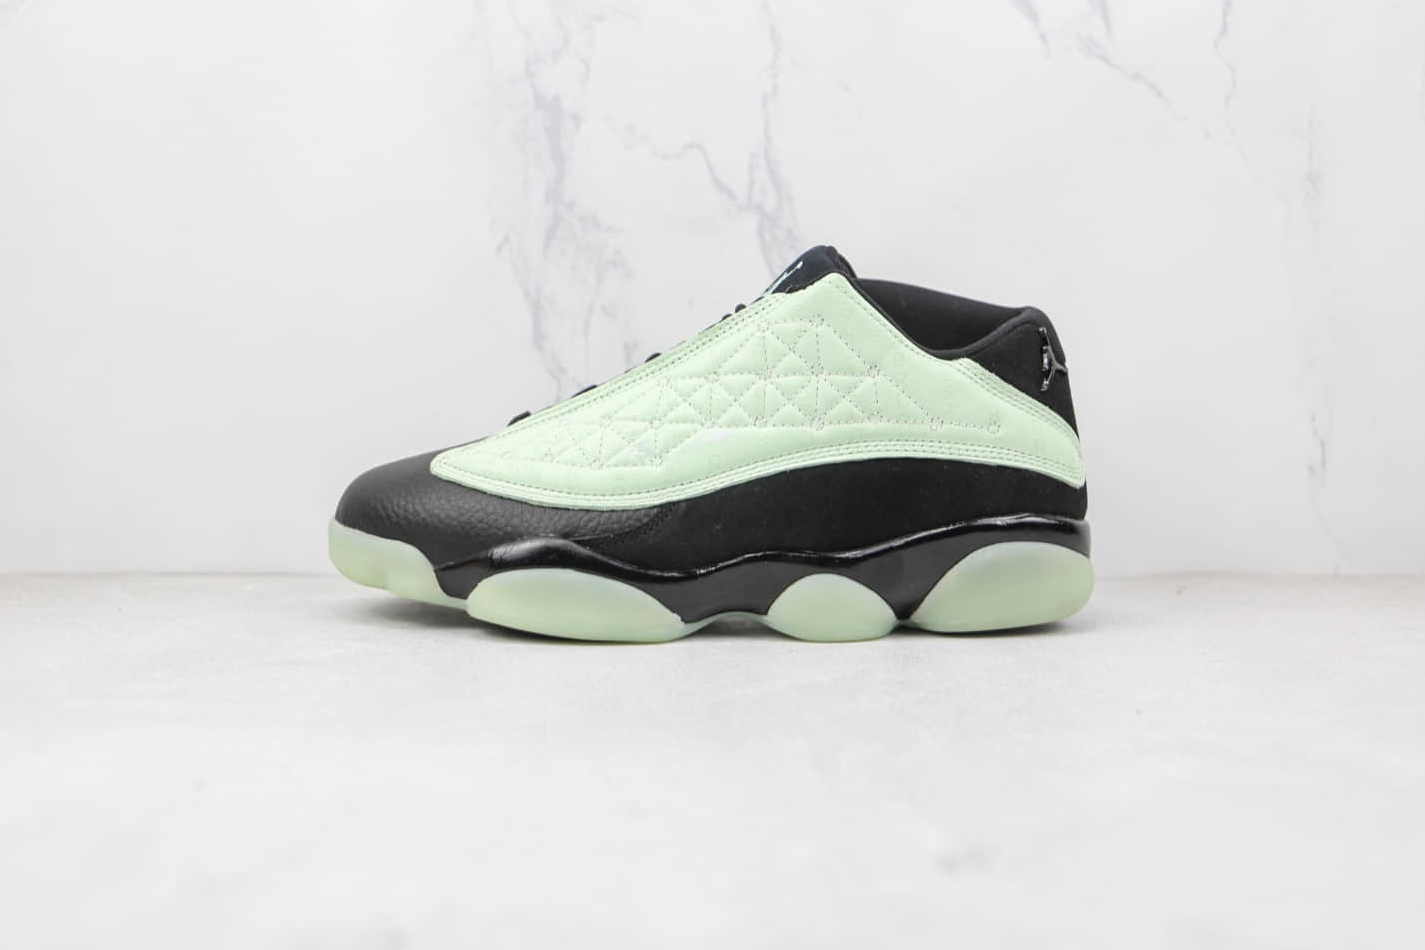 Air Jordan 13 Retro Low 'Singles Day' - Shop the Latest Release at Affordable Prices